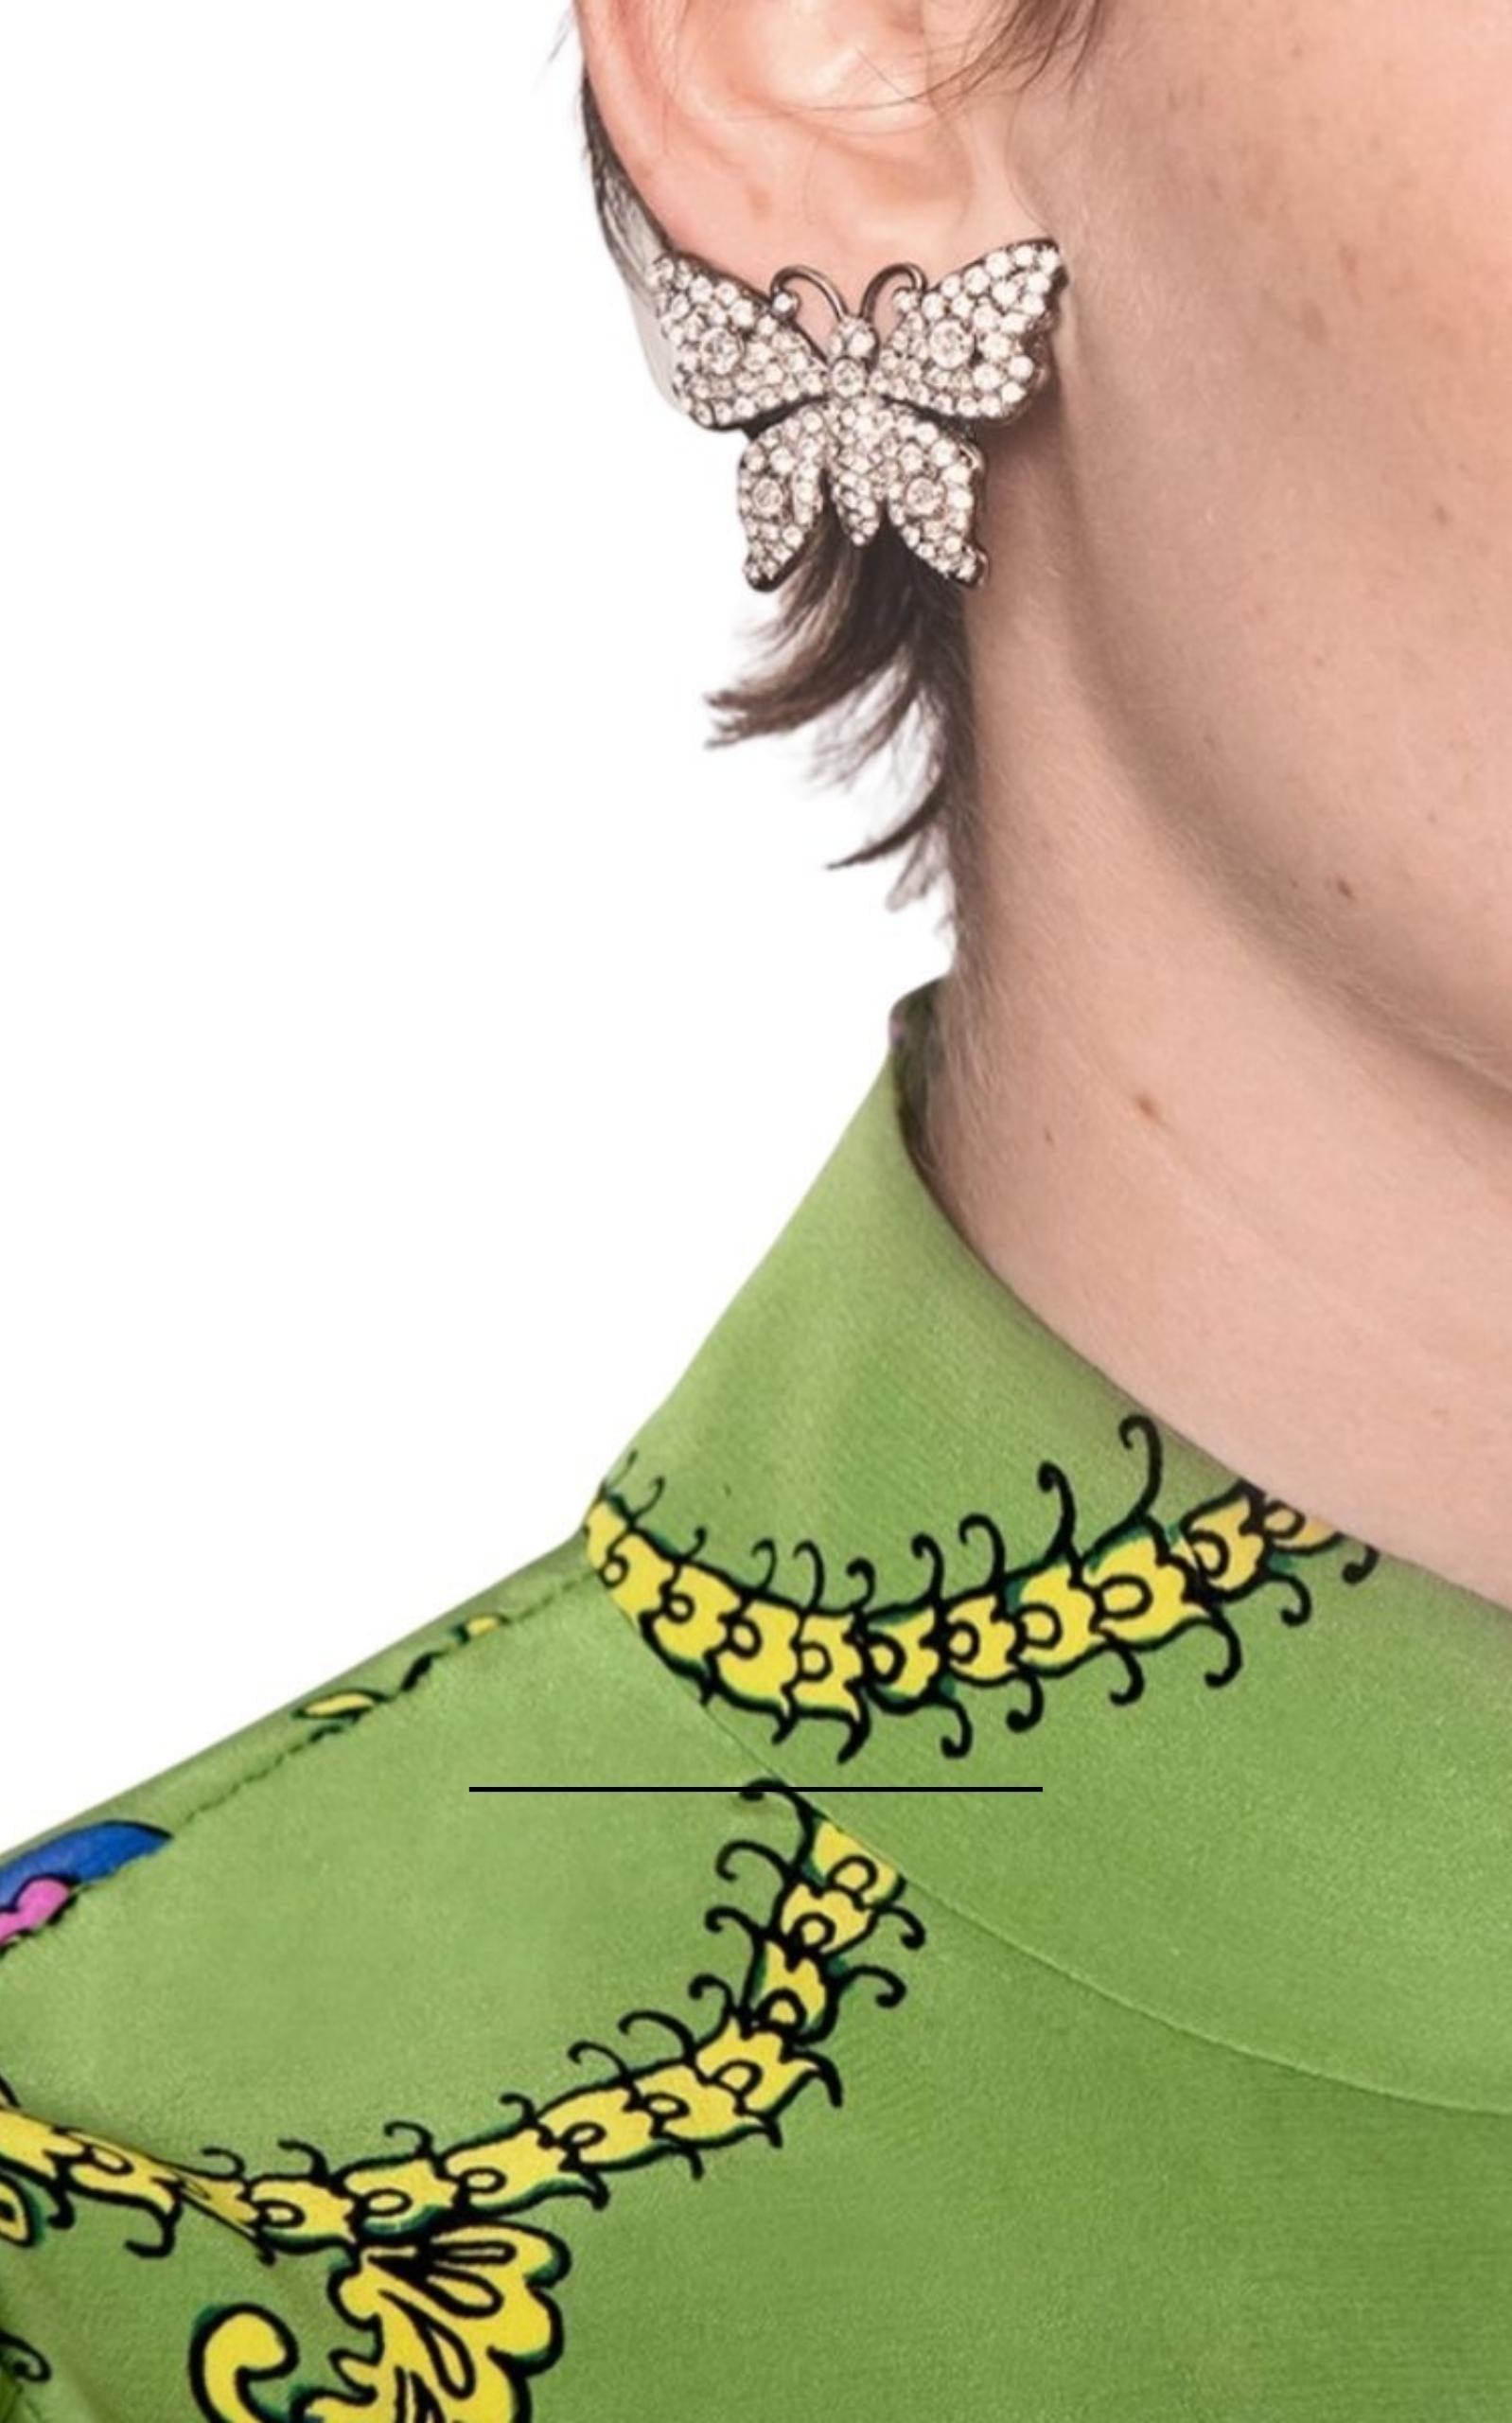  GucciCrystal Embellished Butterfly Earrings - Runway Catalog